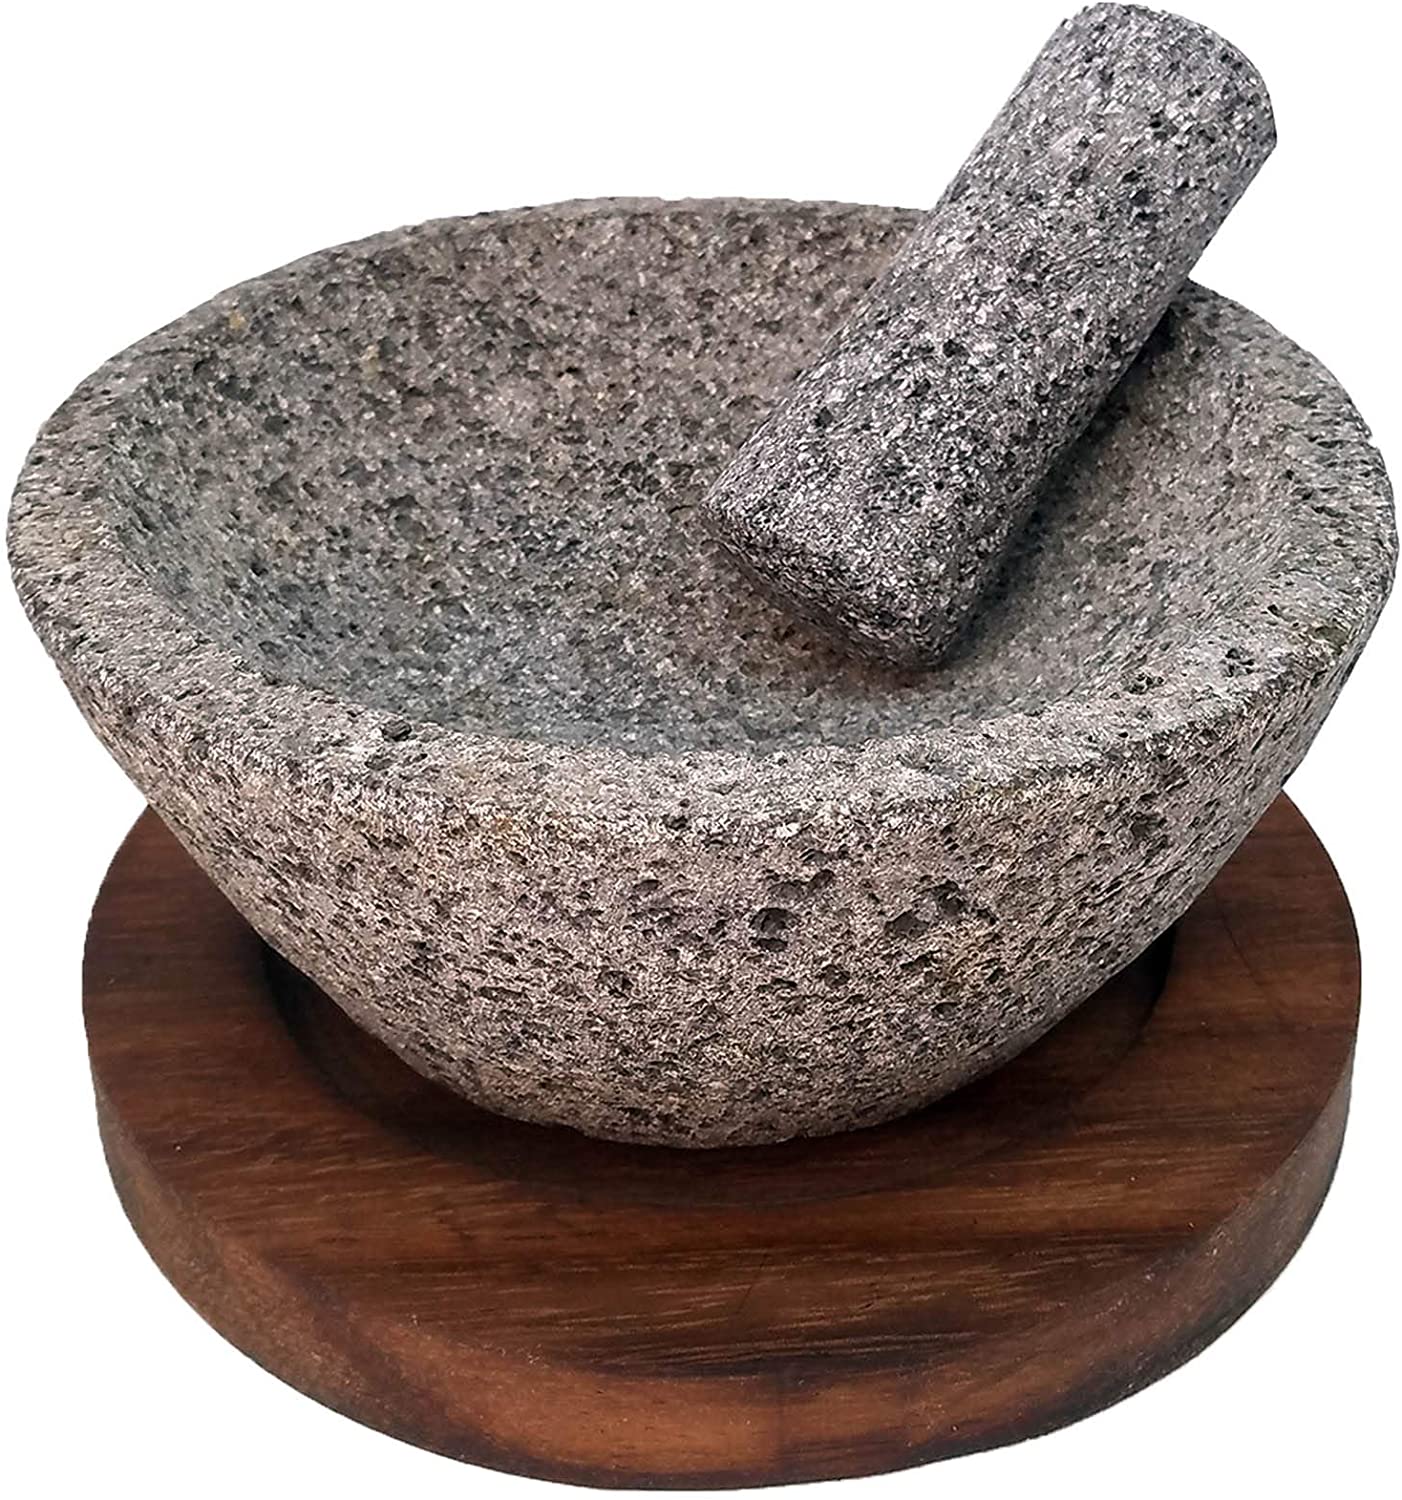 VOLCANIC ROCK PRODUCTS / Round 7'' Mortar and Pestle Set with Parota Wood Serving Board